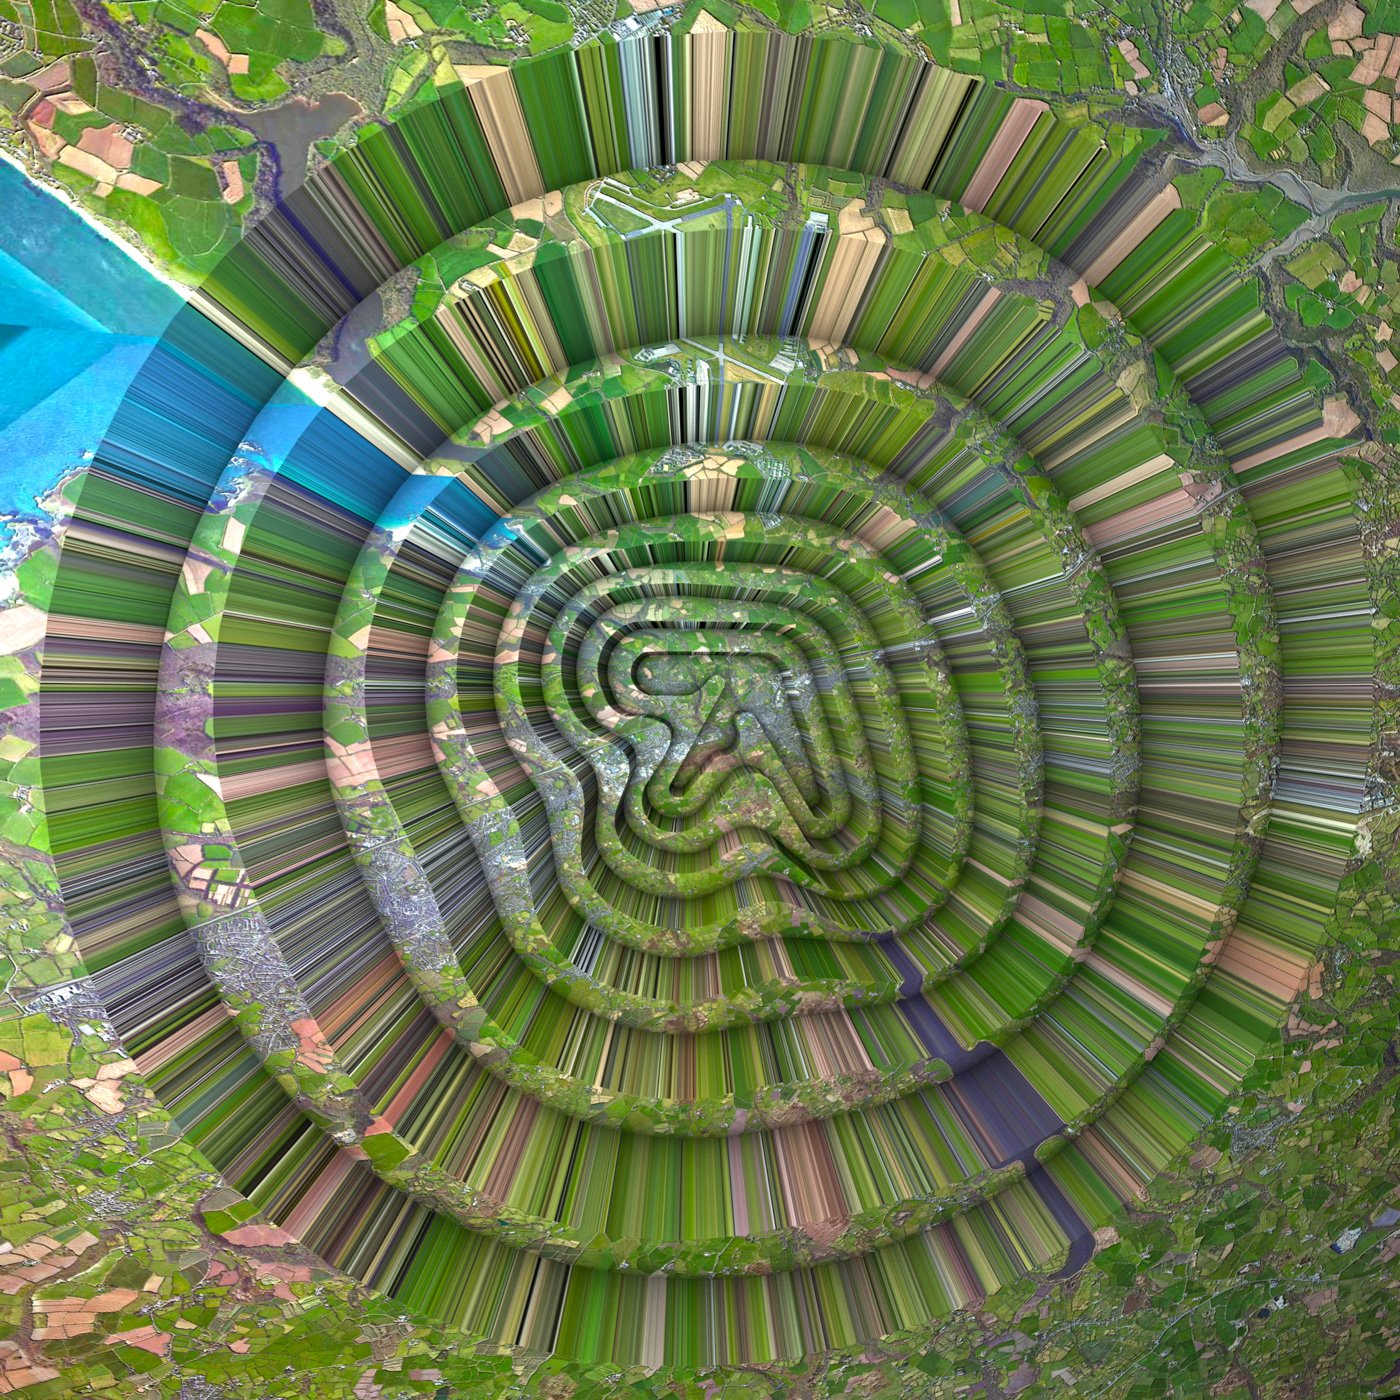 iڍ F APHEX TWIN(12) COLLAPSE EPyDLR[ht!z